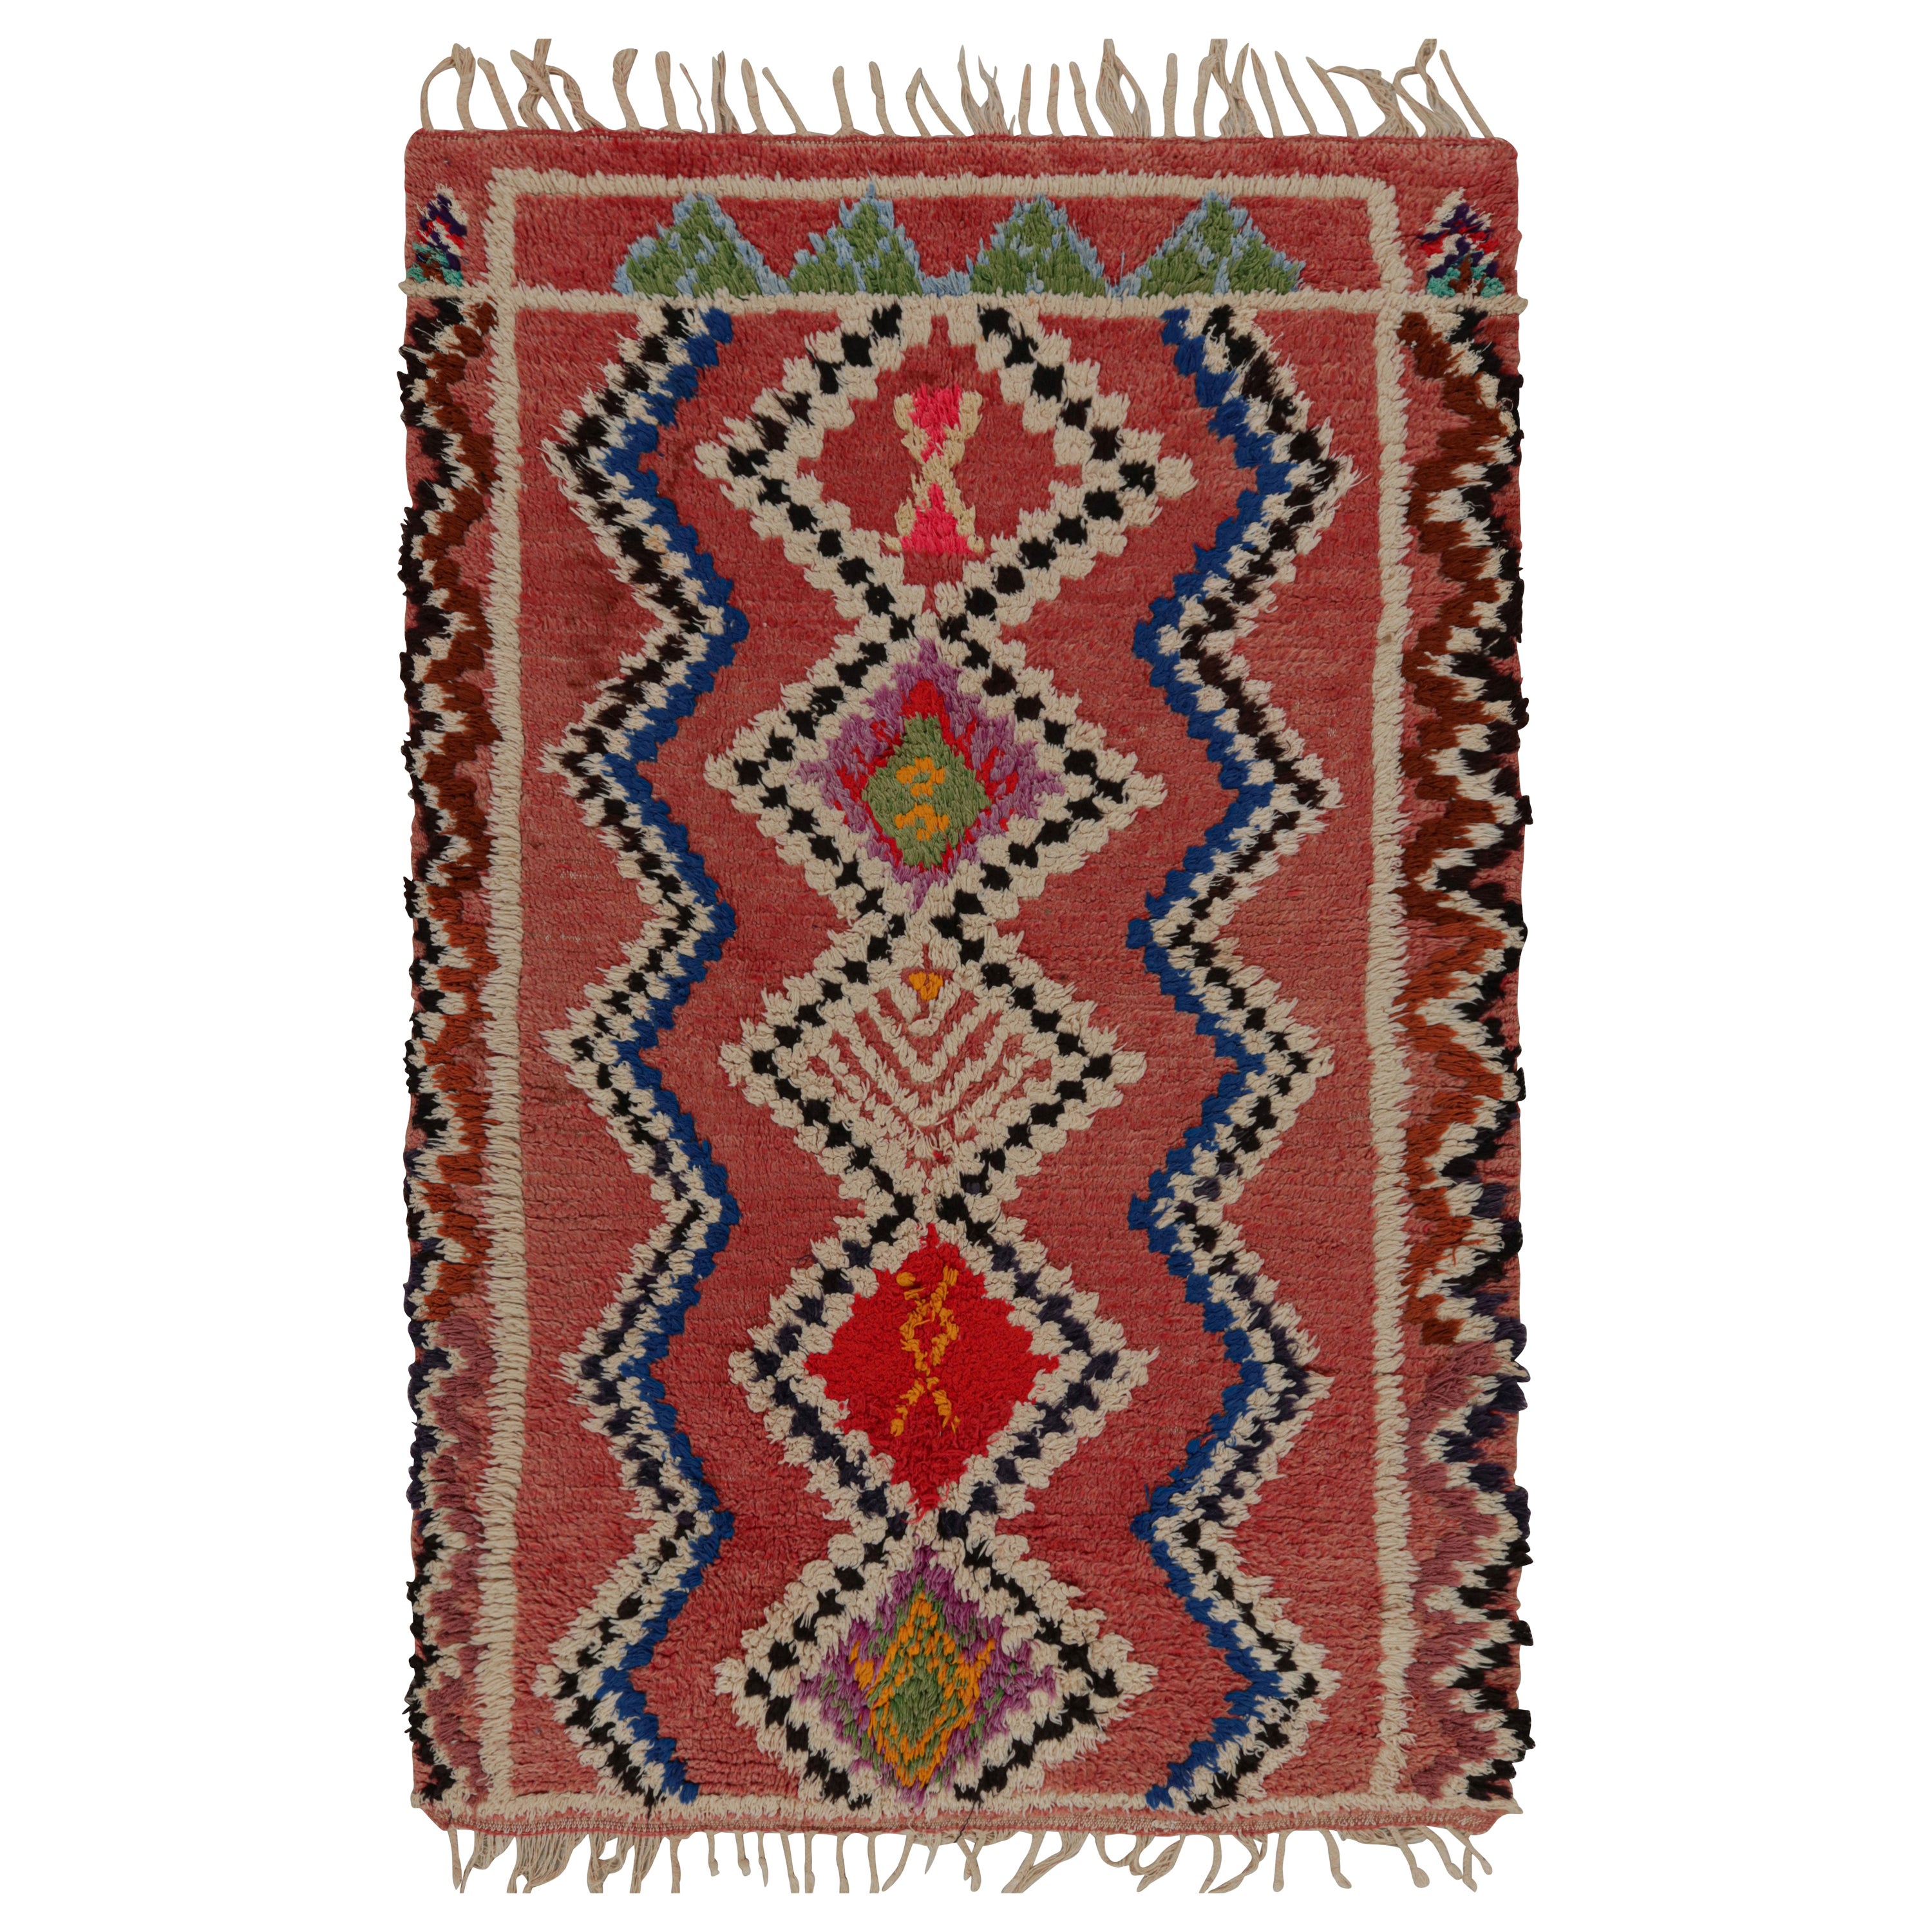 Vintage Moroccan Rug in Salmon Red with Geometric Patterns, from Rug & Kilim  For Sale